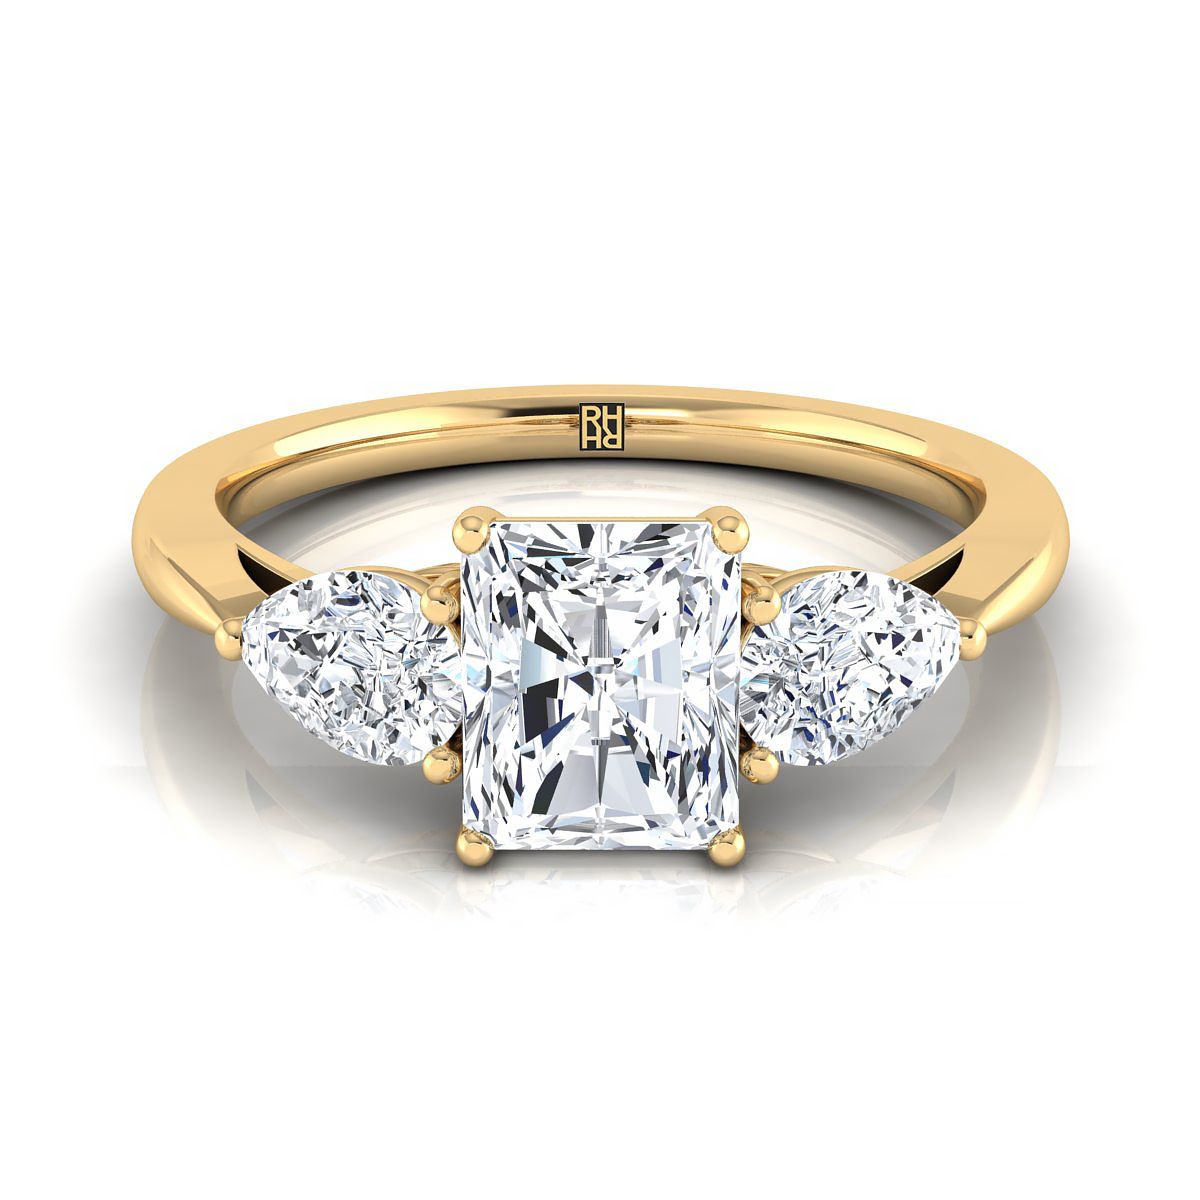 18K Yellow Gold Radiant Cut Center Diamond Perfectly Matched Pear Shaped Three Diamond Engagement Ring -7/8ctw